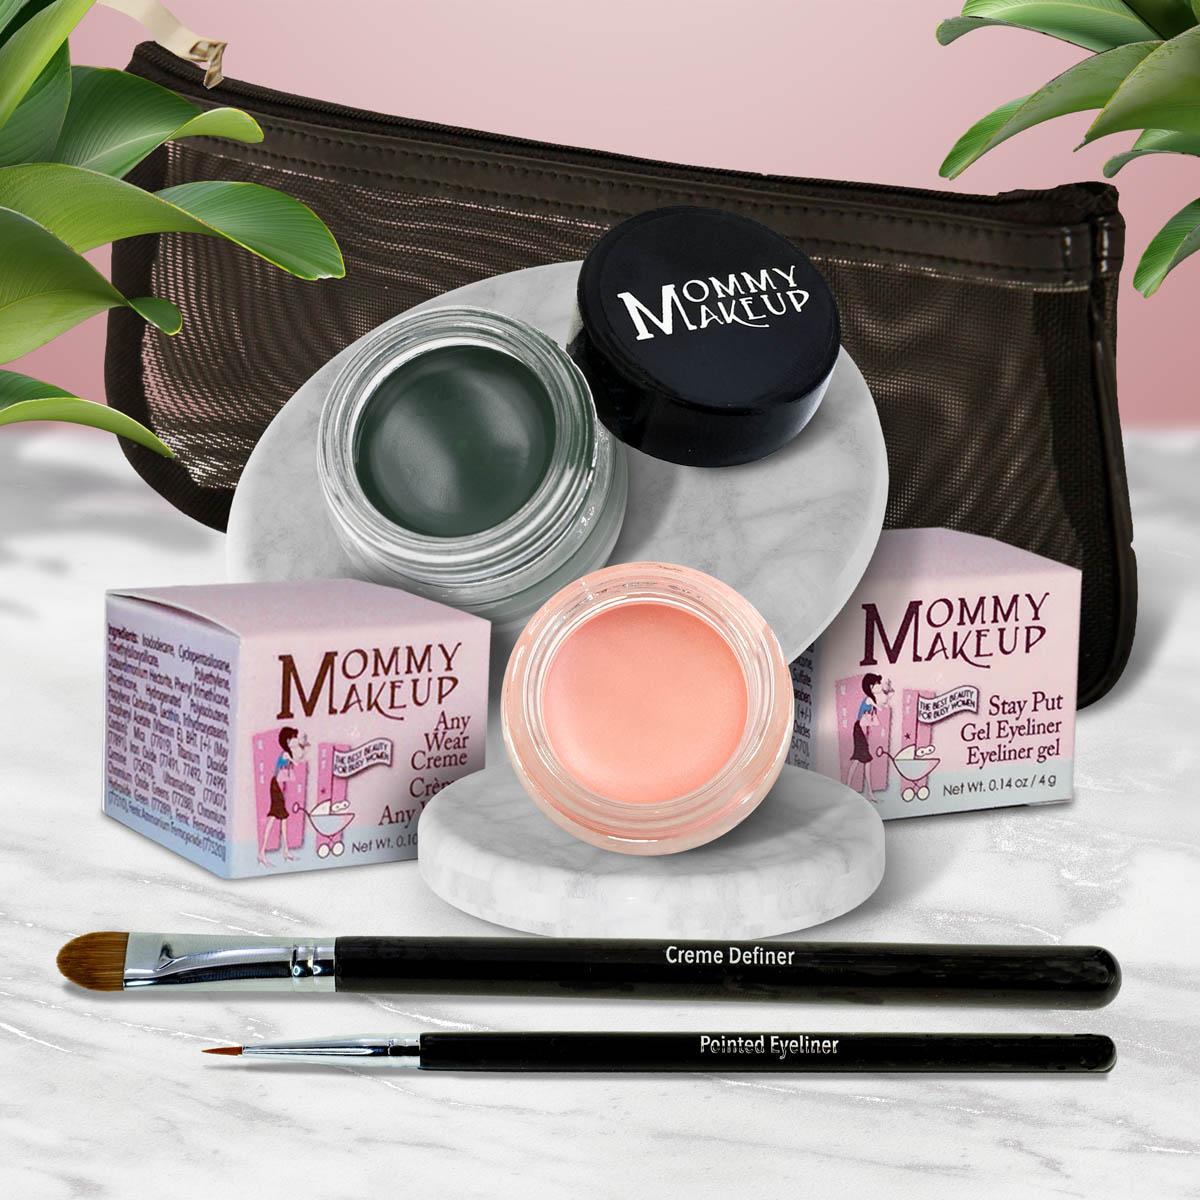 5 piece waterproof eye makeup set. Eyeliner, Eye shadow, brushes. Allergy tested, cruelty free. Made in USA. Duchess - A Peachy Rose with a Silver Sheen and Hunter - A Rich Hunter/Forest Green